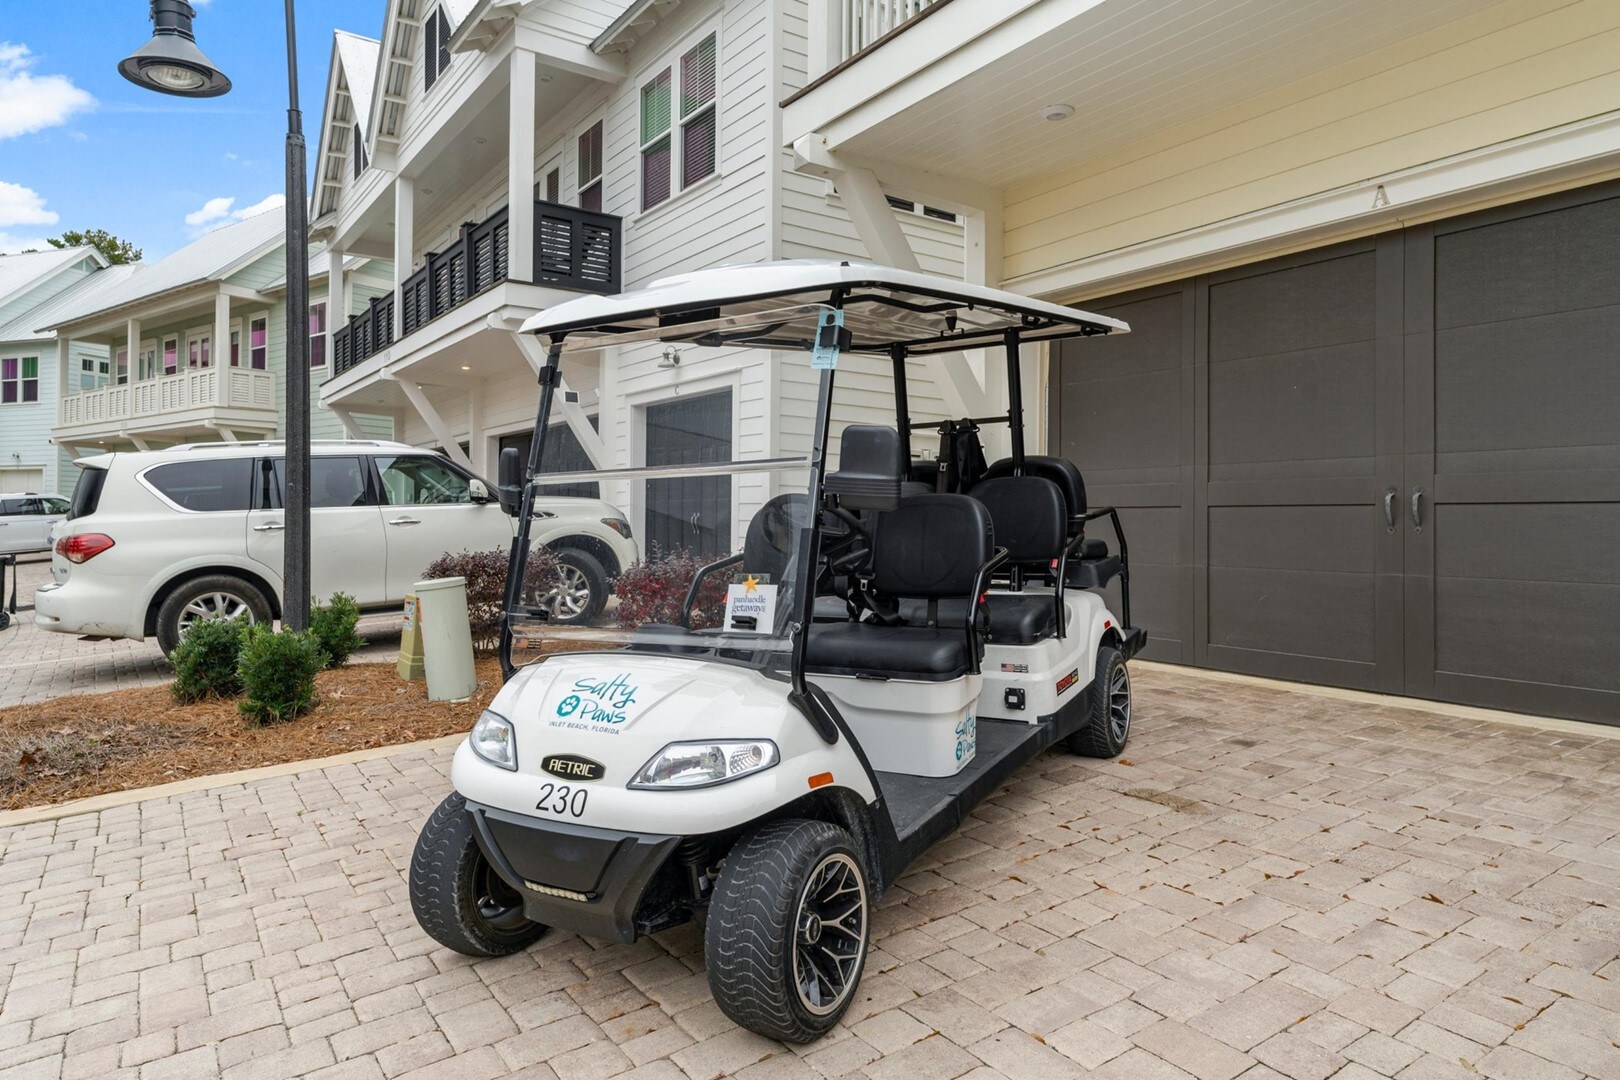 6 Seater Golf Cart Included with Your Rental!